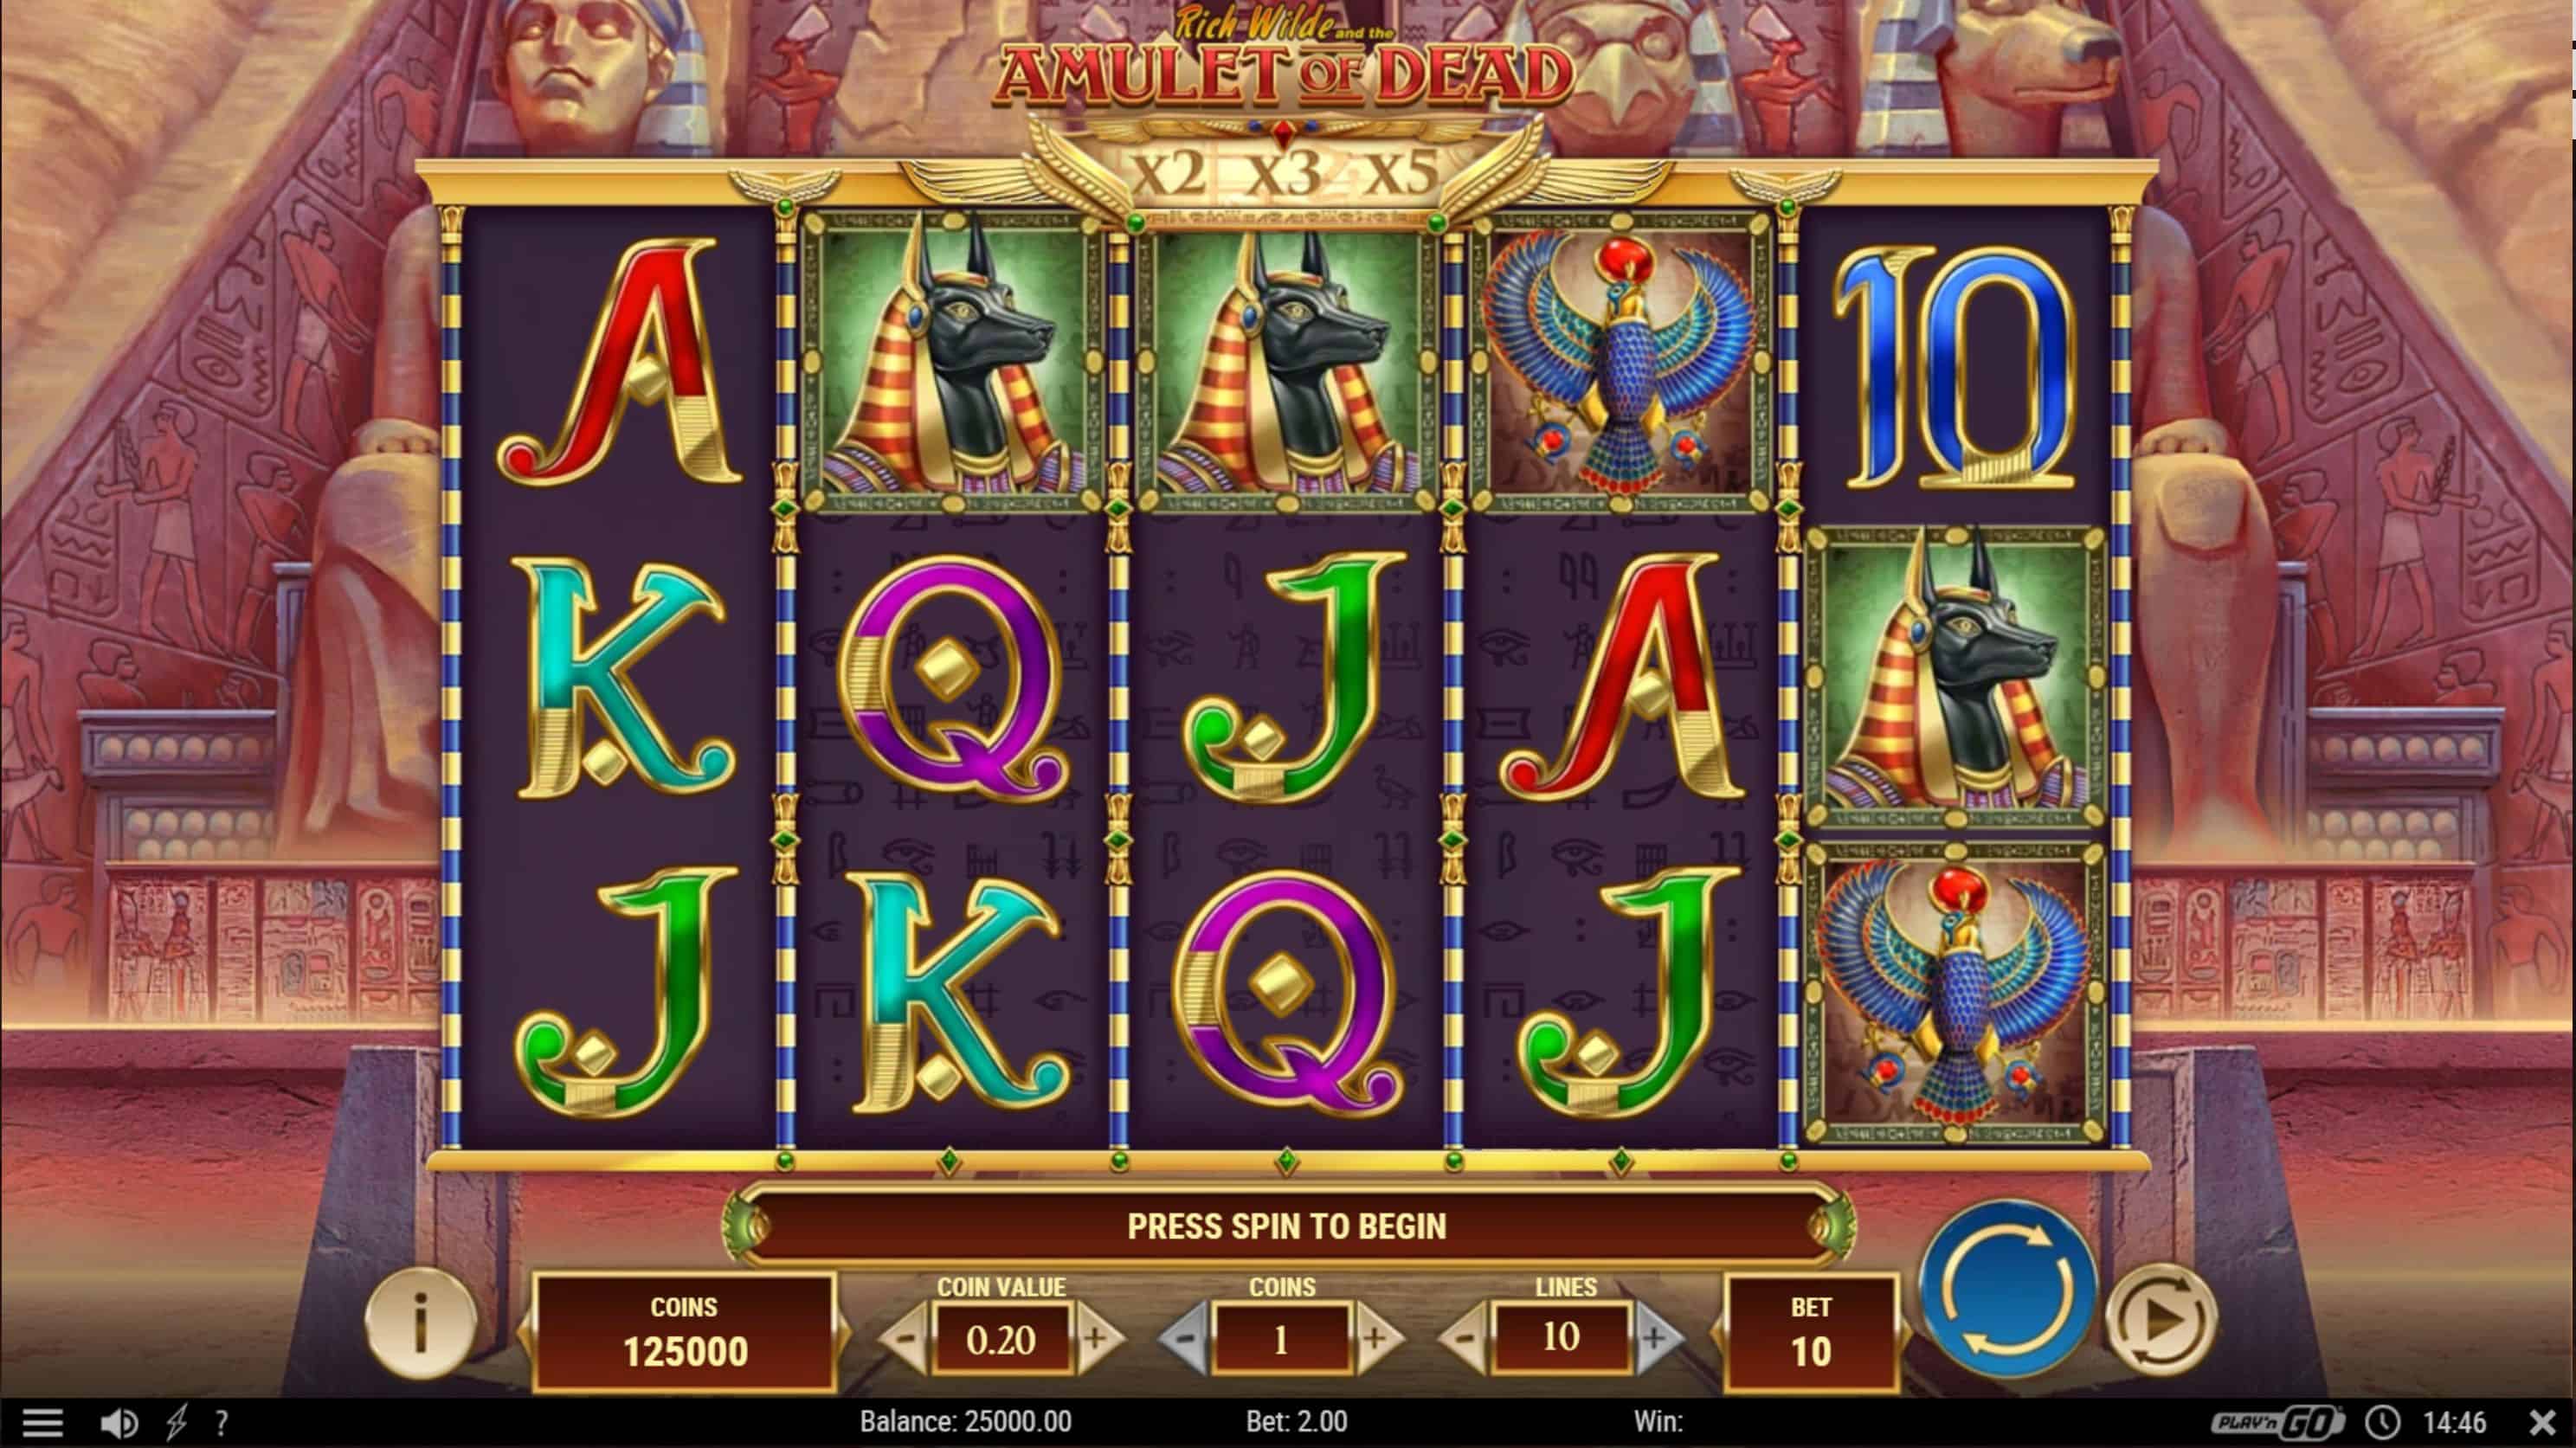 Rich Wilde and the Amulet of Dead Slot Game Free Play at Casino Ireland 01